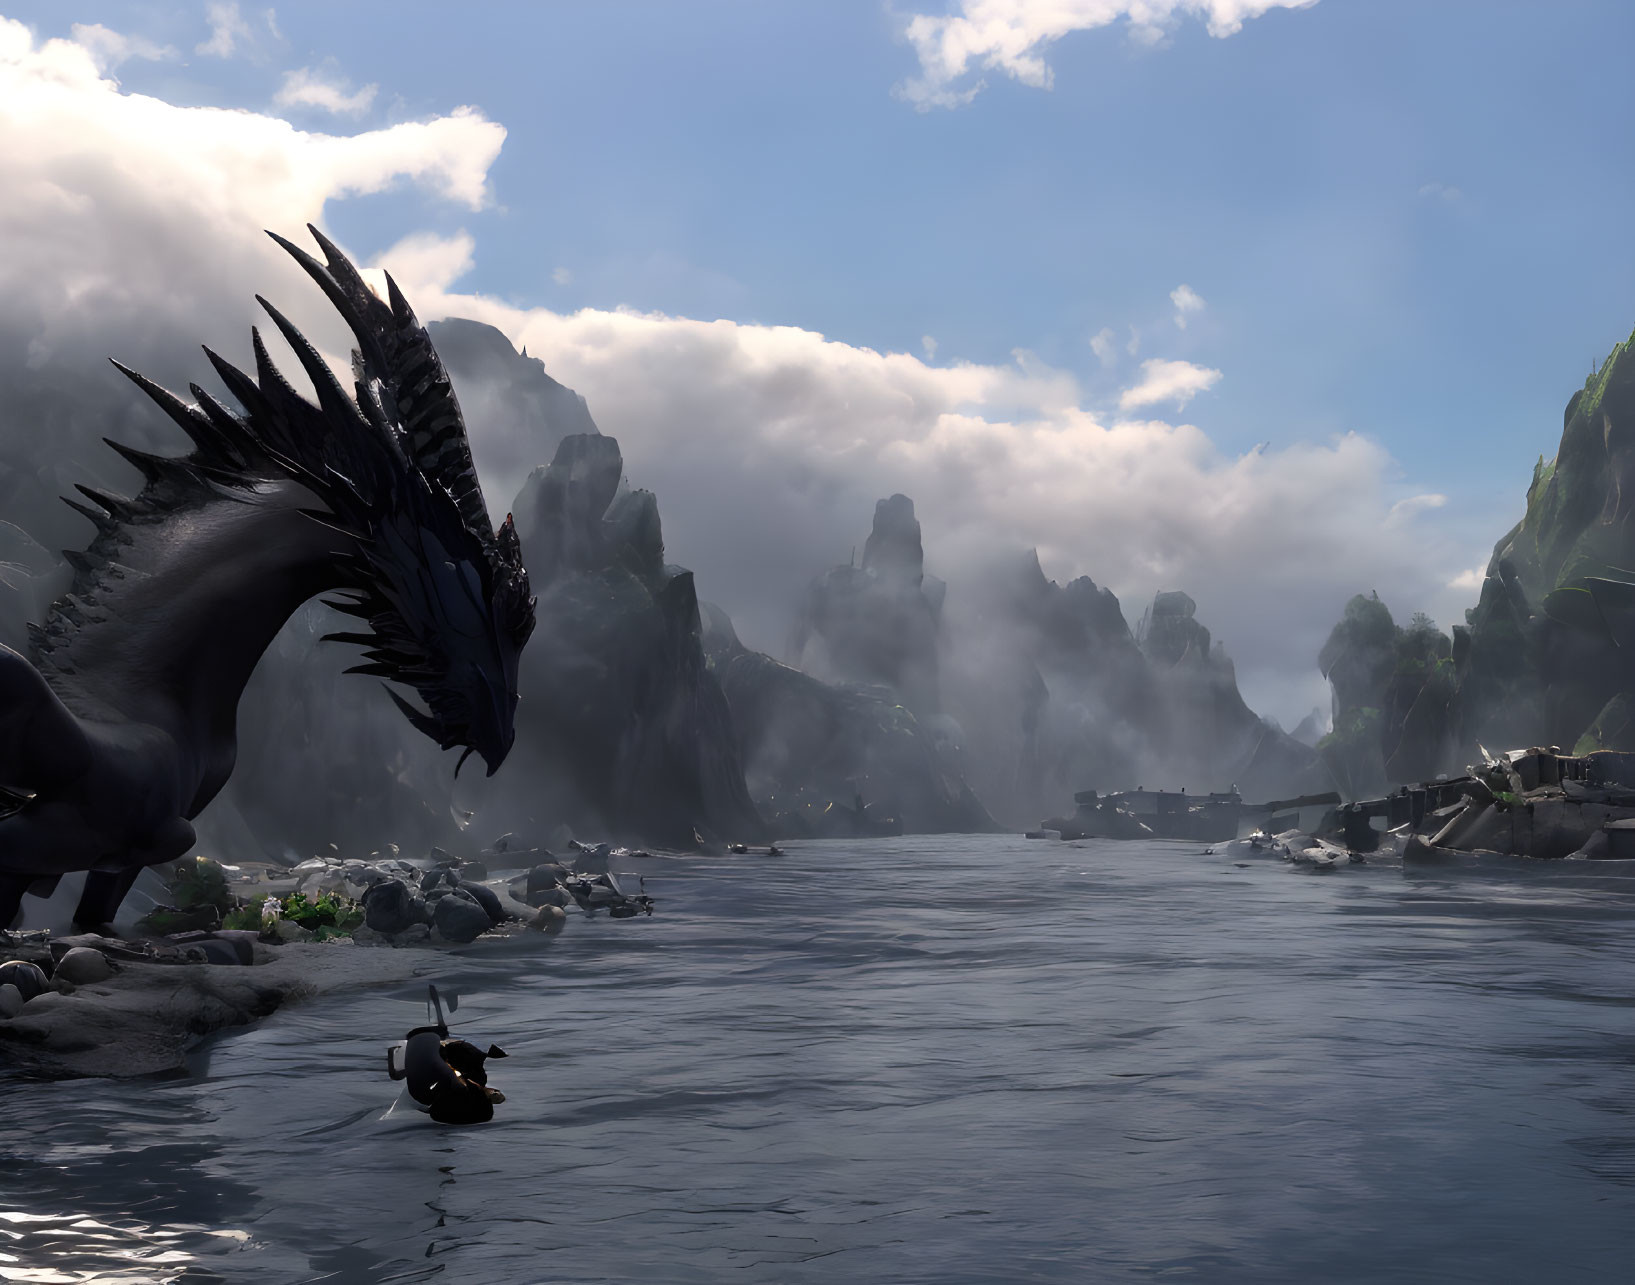 A gray dragon drinking water